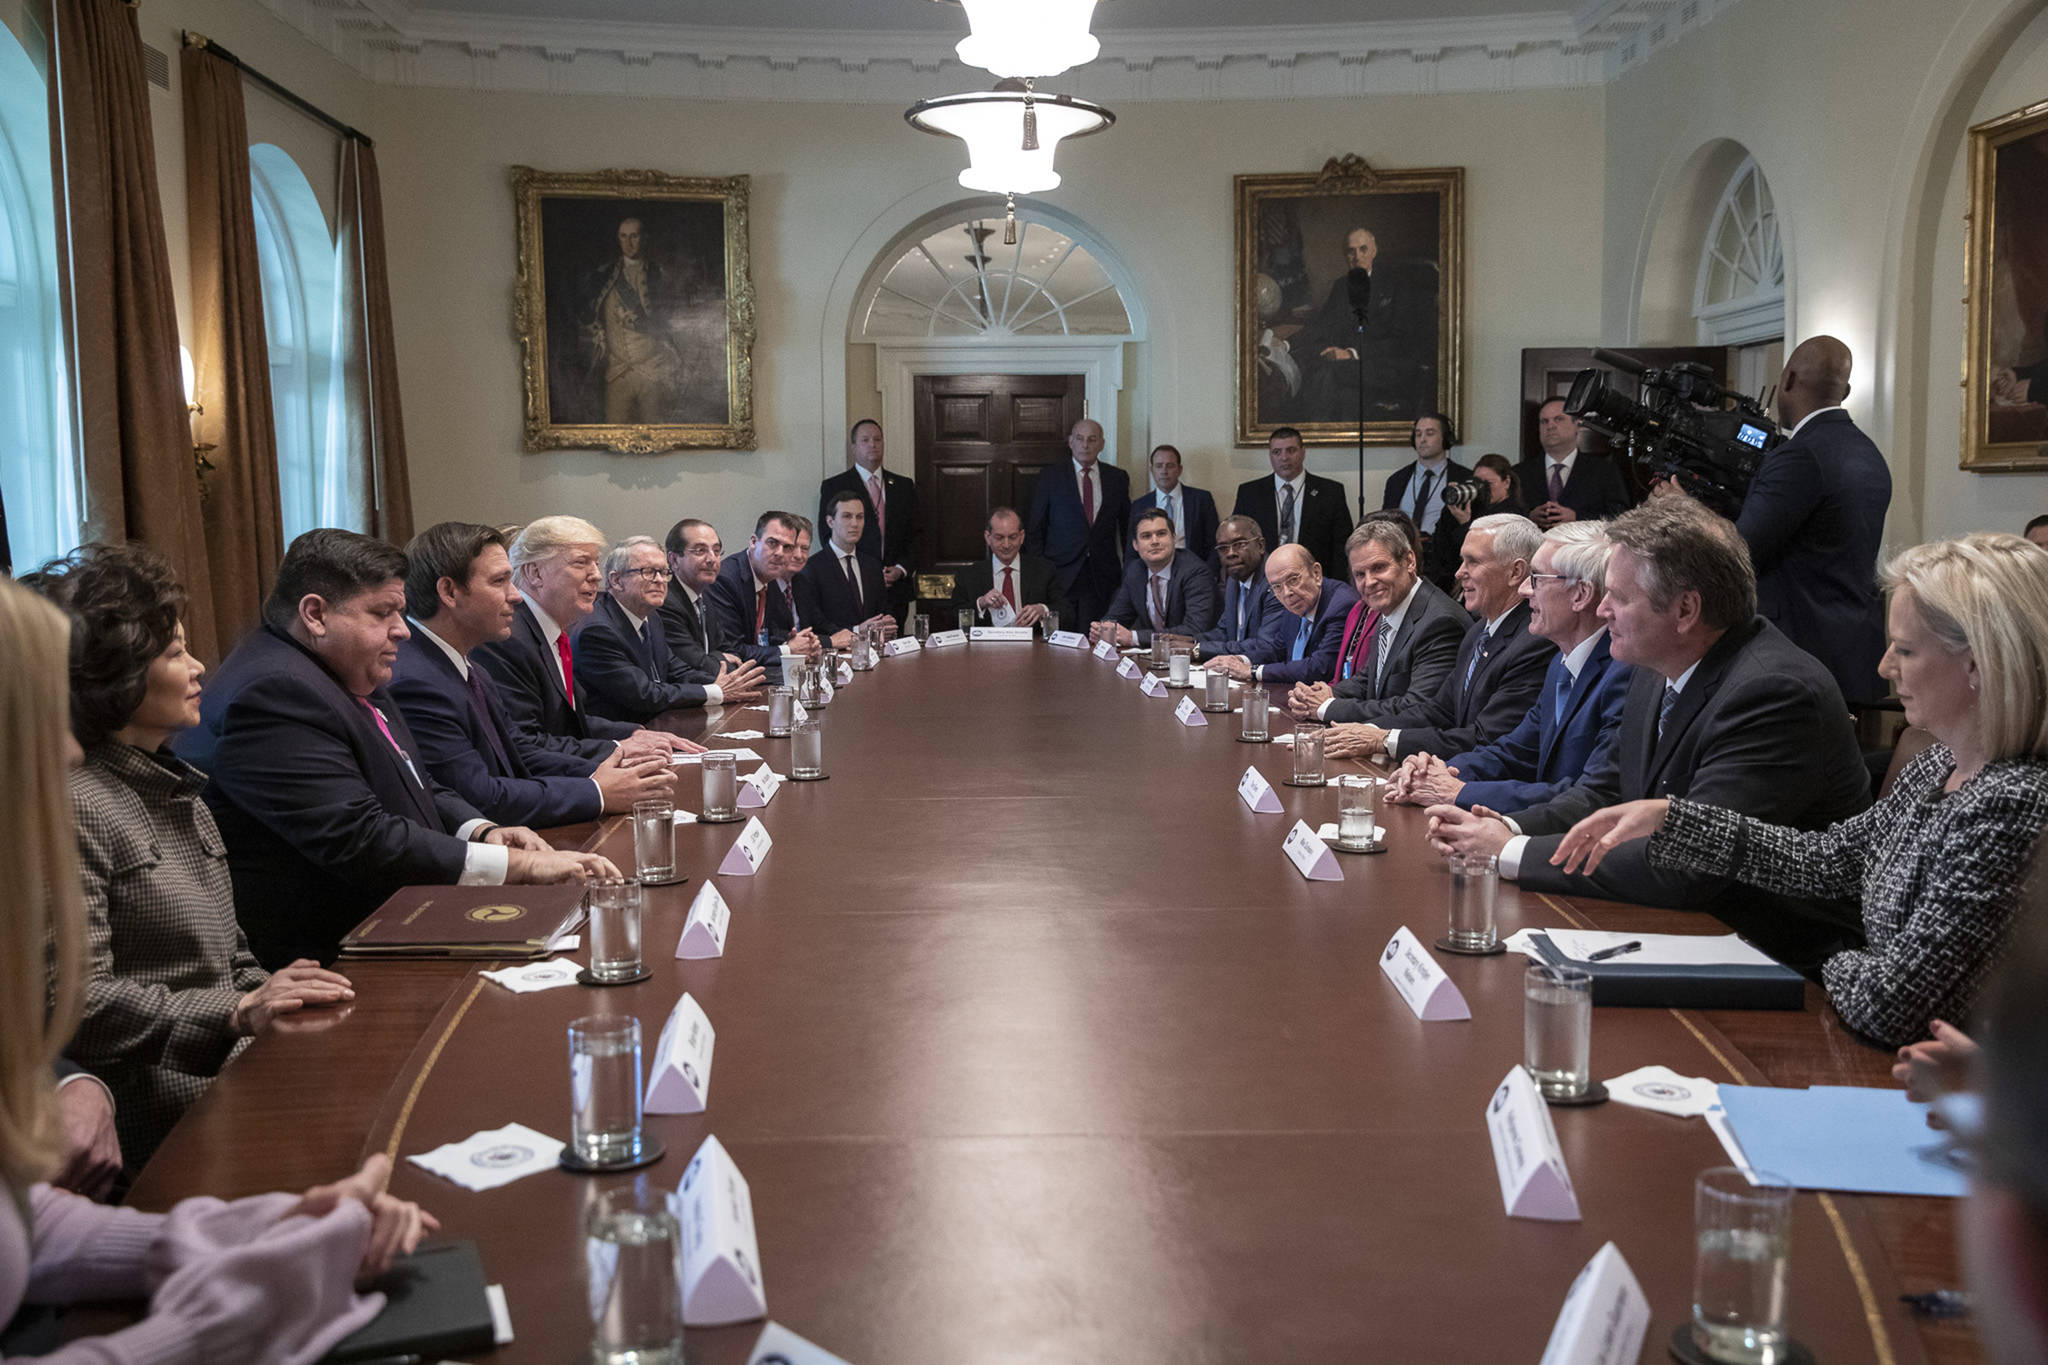 President Donald J. Trump, joined by Vice President Mike Pence, participates in a discussion with Governors-Elect on Thursday in the Cabinet Room of the White House. (Official White House Photo | Joyce N. Boghosian)